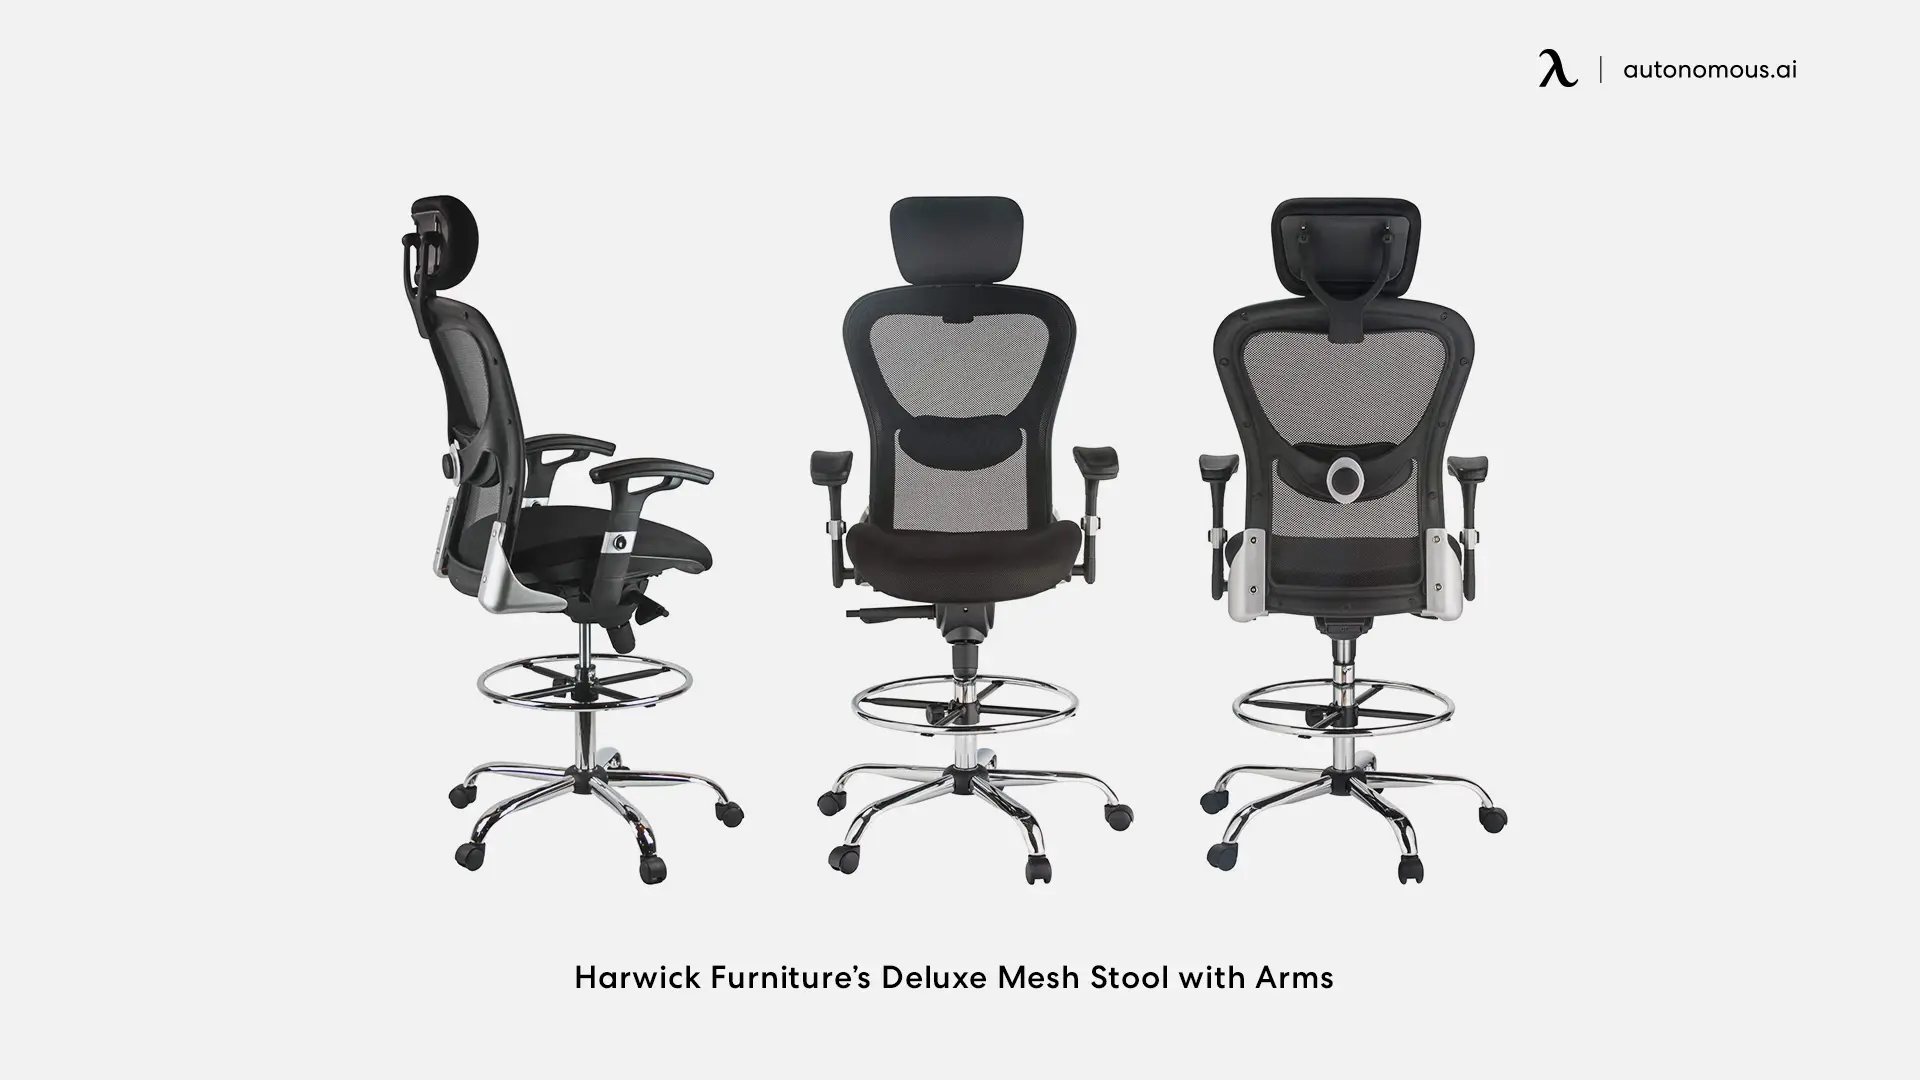 Harwick Furniture’s Deluxe Mesh Stool with Arms